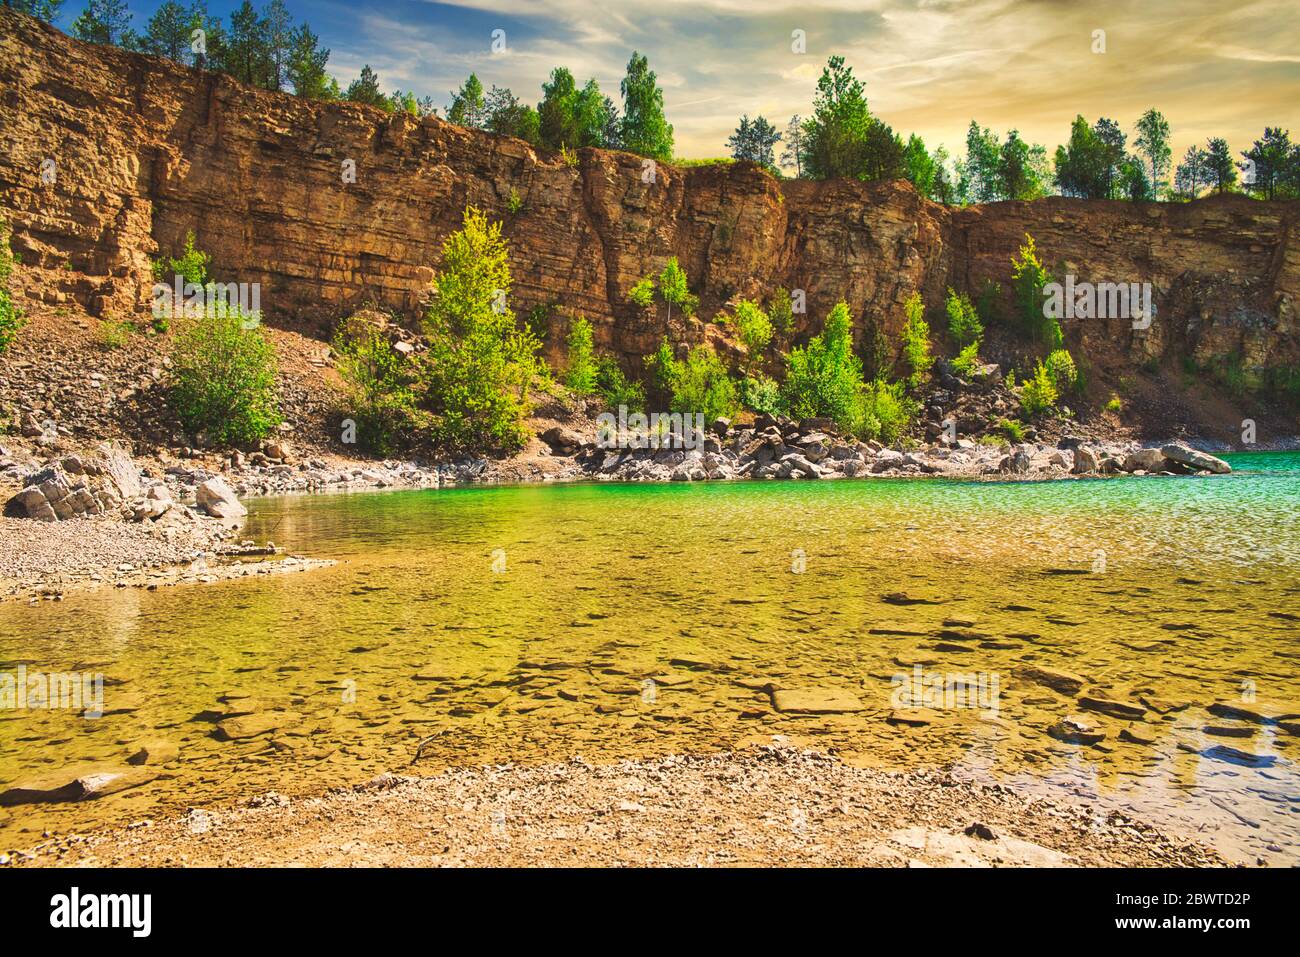 Azure lake. The concept of landscape and relaxing in the fresh air. Trukus water reservoir, attraction and a beautiful place to spend free time. Beaut Stock Photo